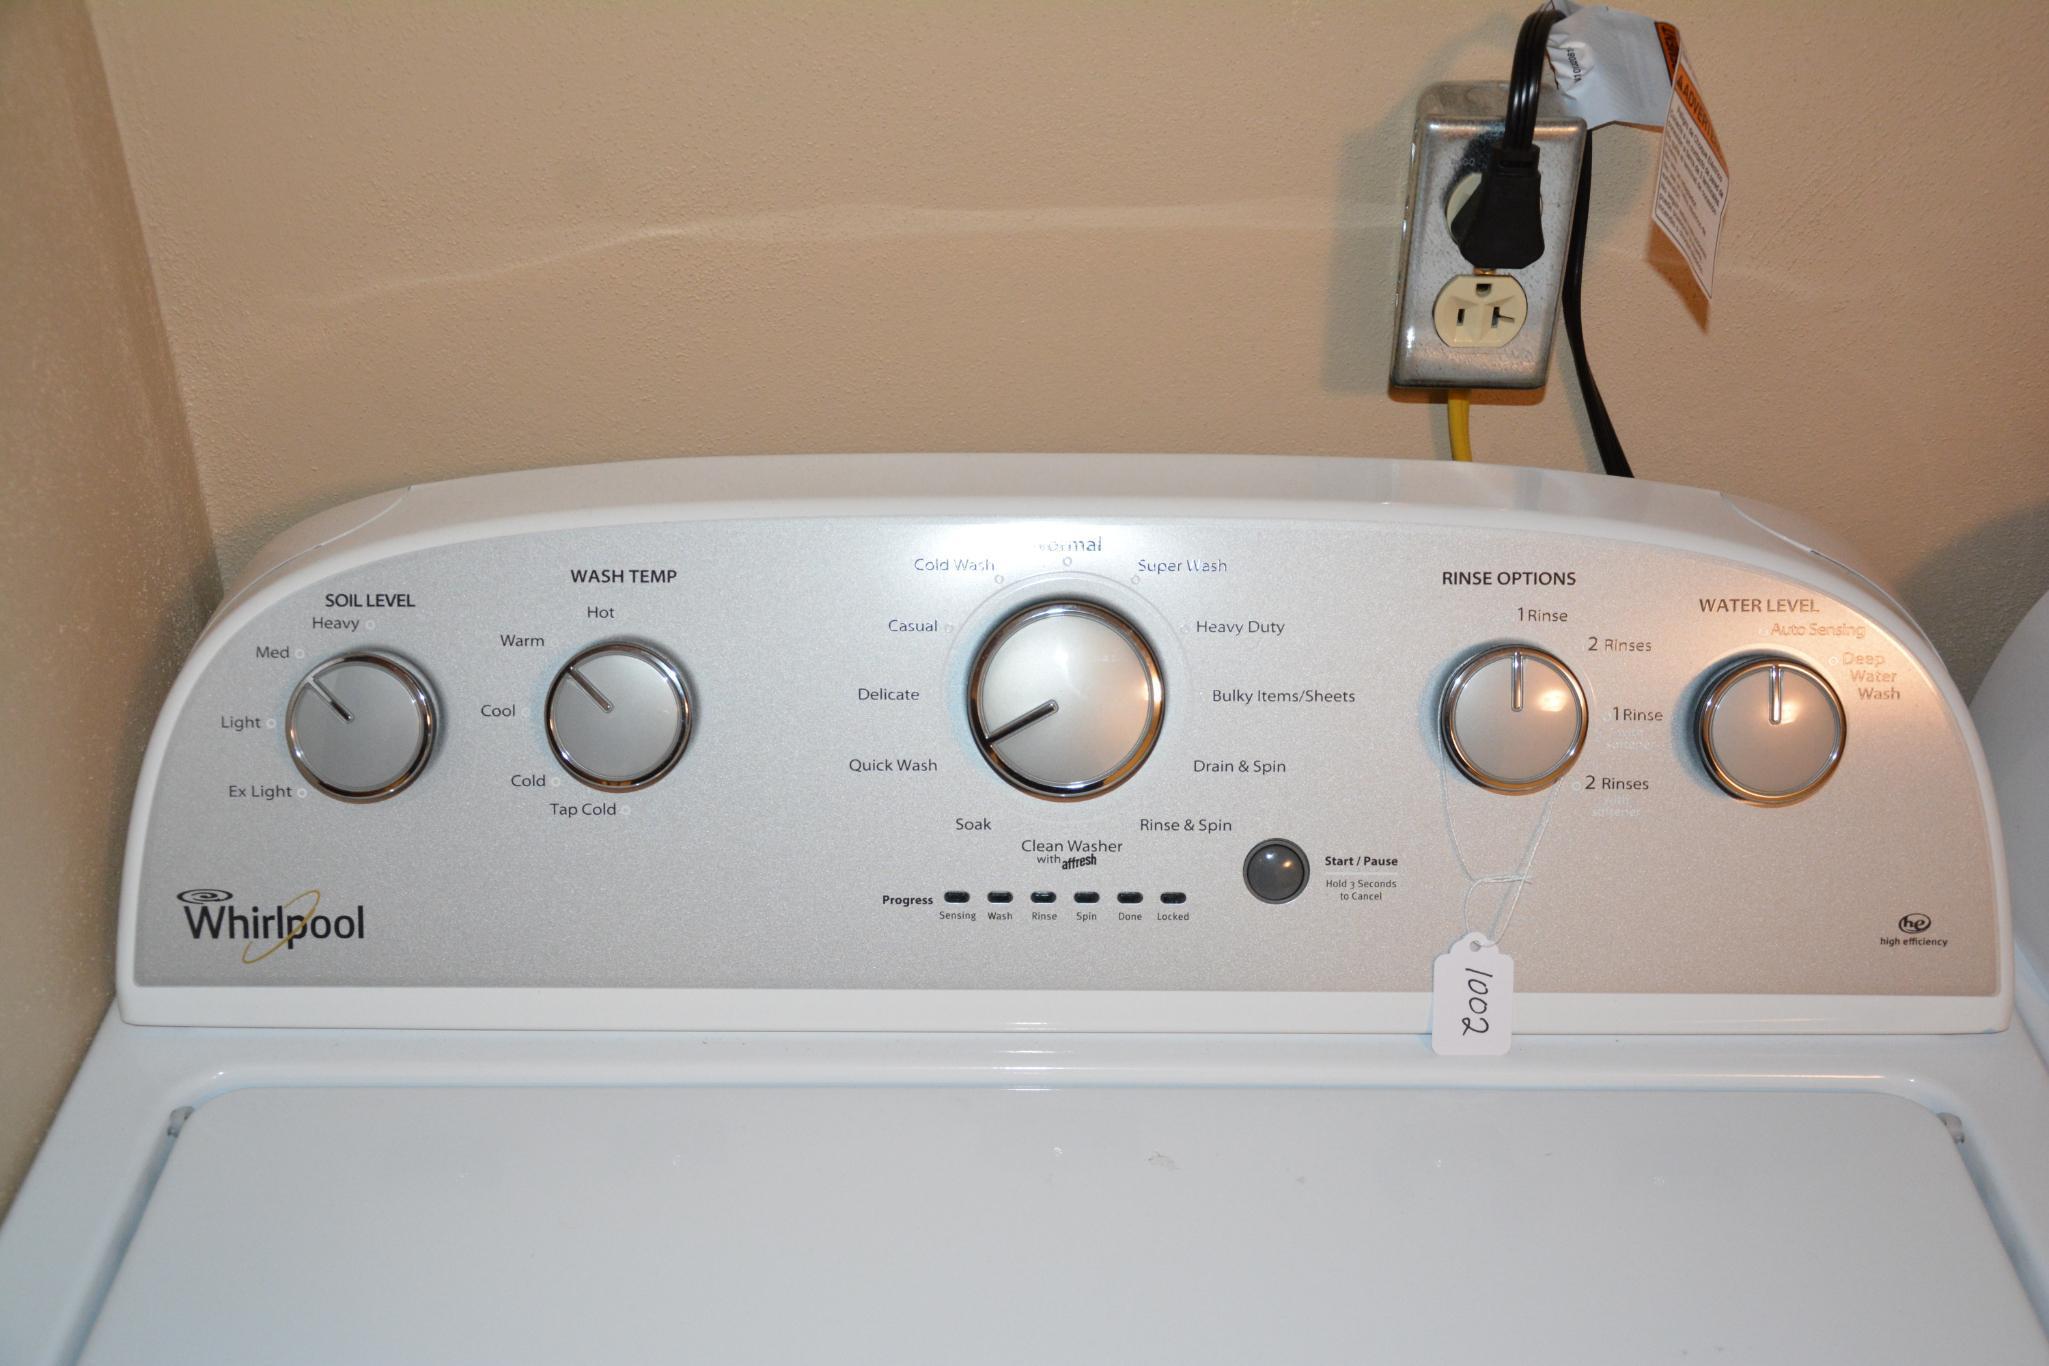 Whirlpool matching washer and dryer